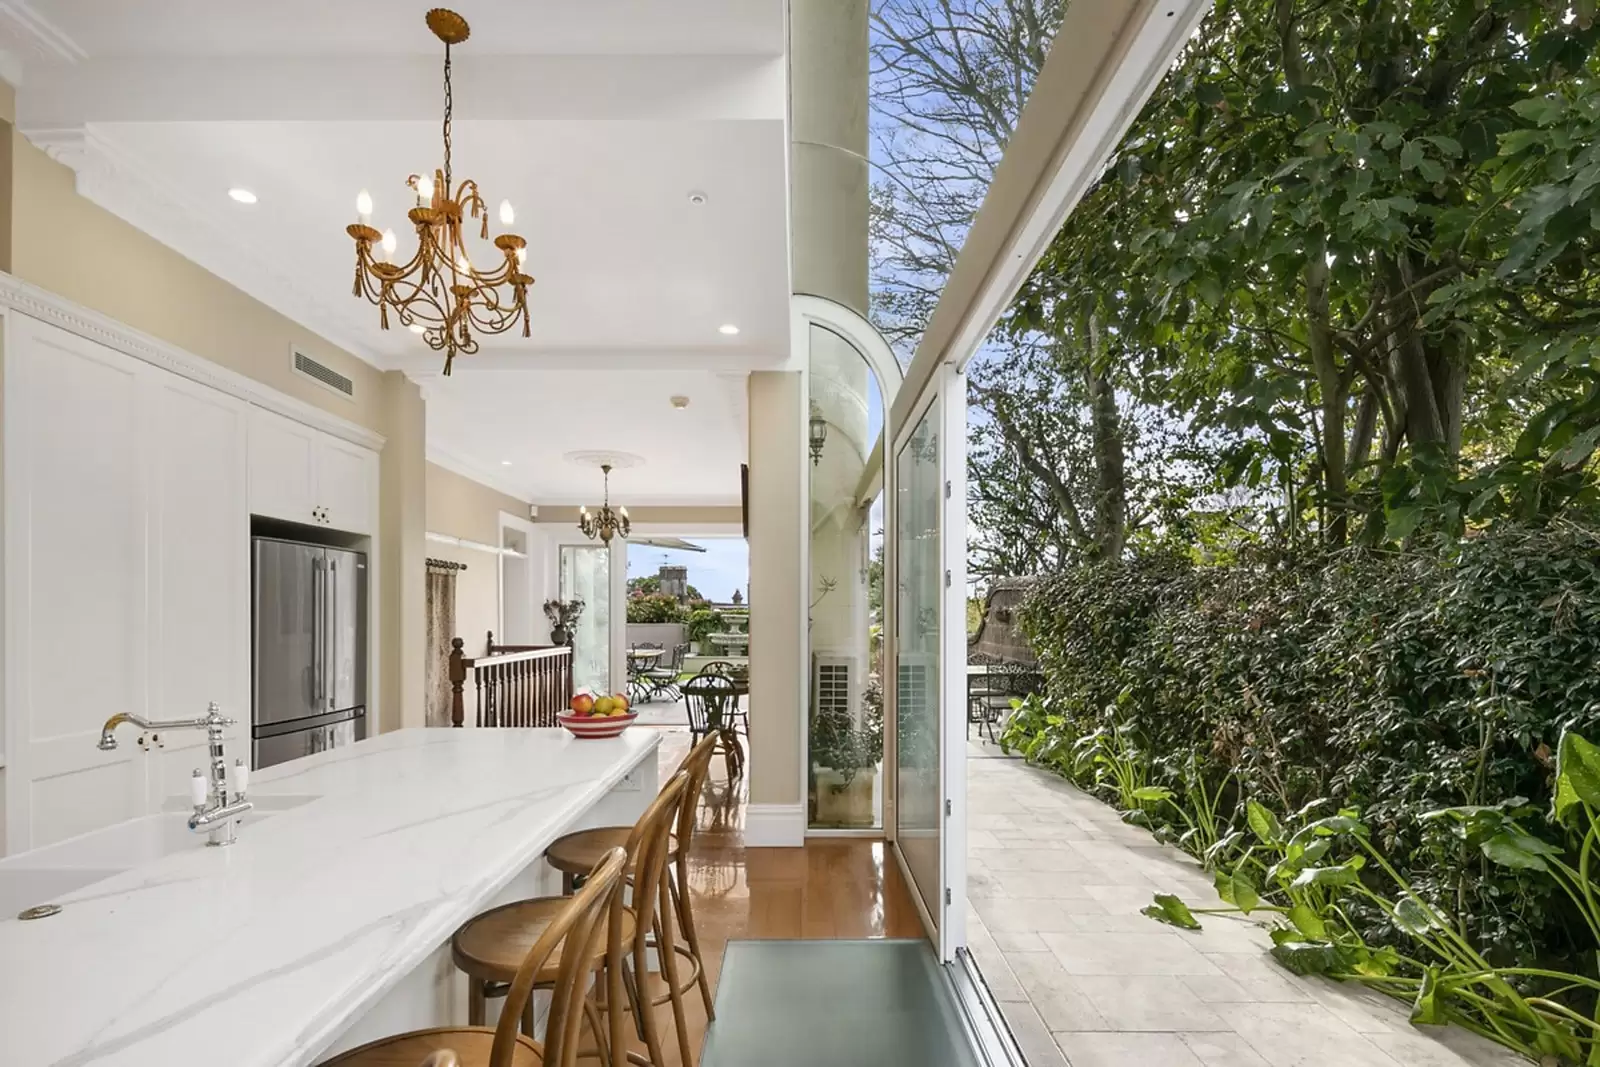 Photo #7: 88 Old South Head Road, Woollahra - For Sale by Sydney Sotheby's International Realty